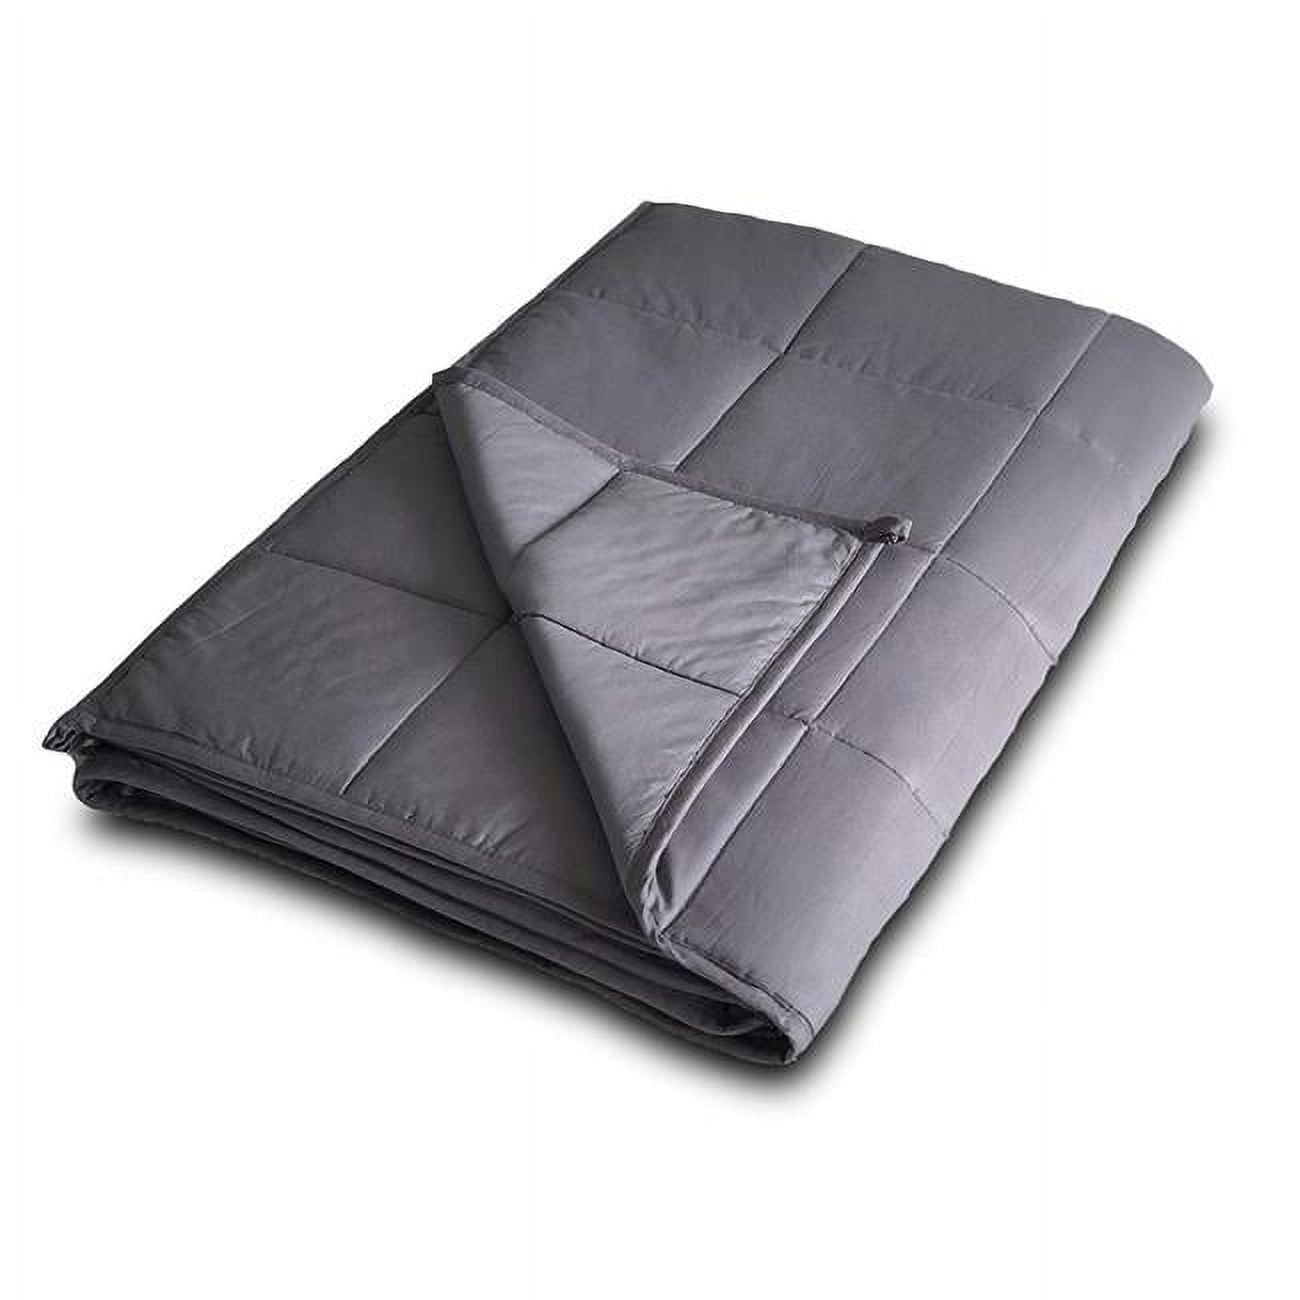 Dcwb15-ws 60 X 80 In. 15 Lbs Weighted Blanket - Gray